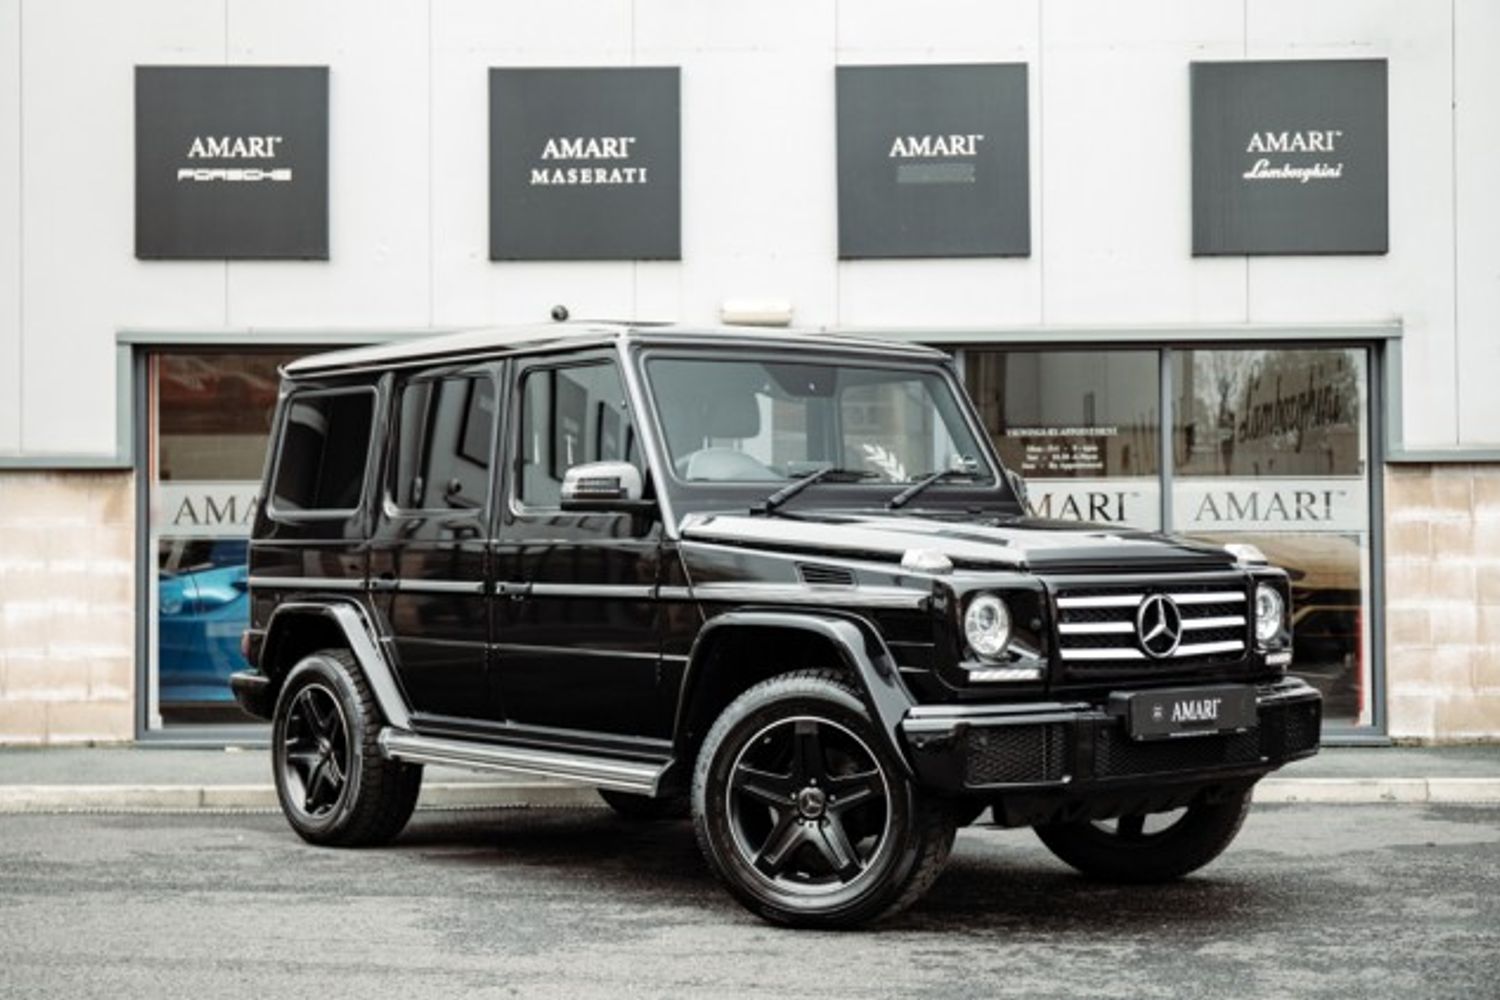 MERCEDES-BENZ G-CLASS DIESEL ESTATE 3.0 G 350 D 4MATIC NIGHT EDITION 5DR AUTOMATIC